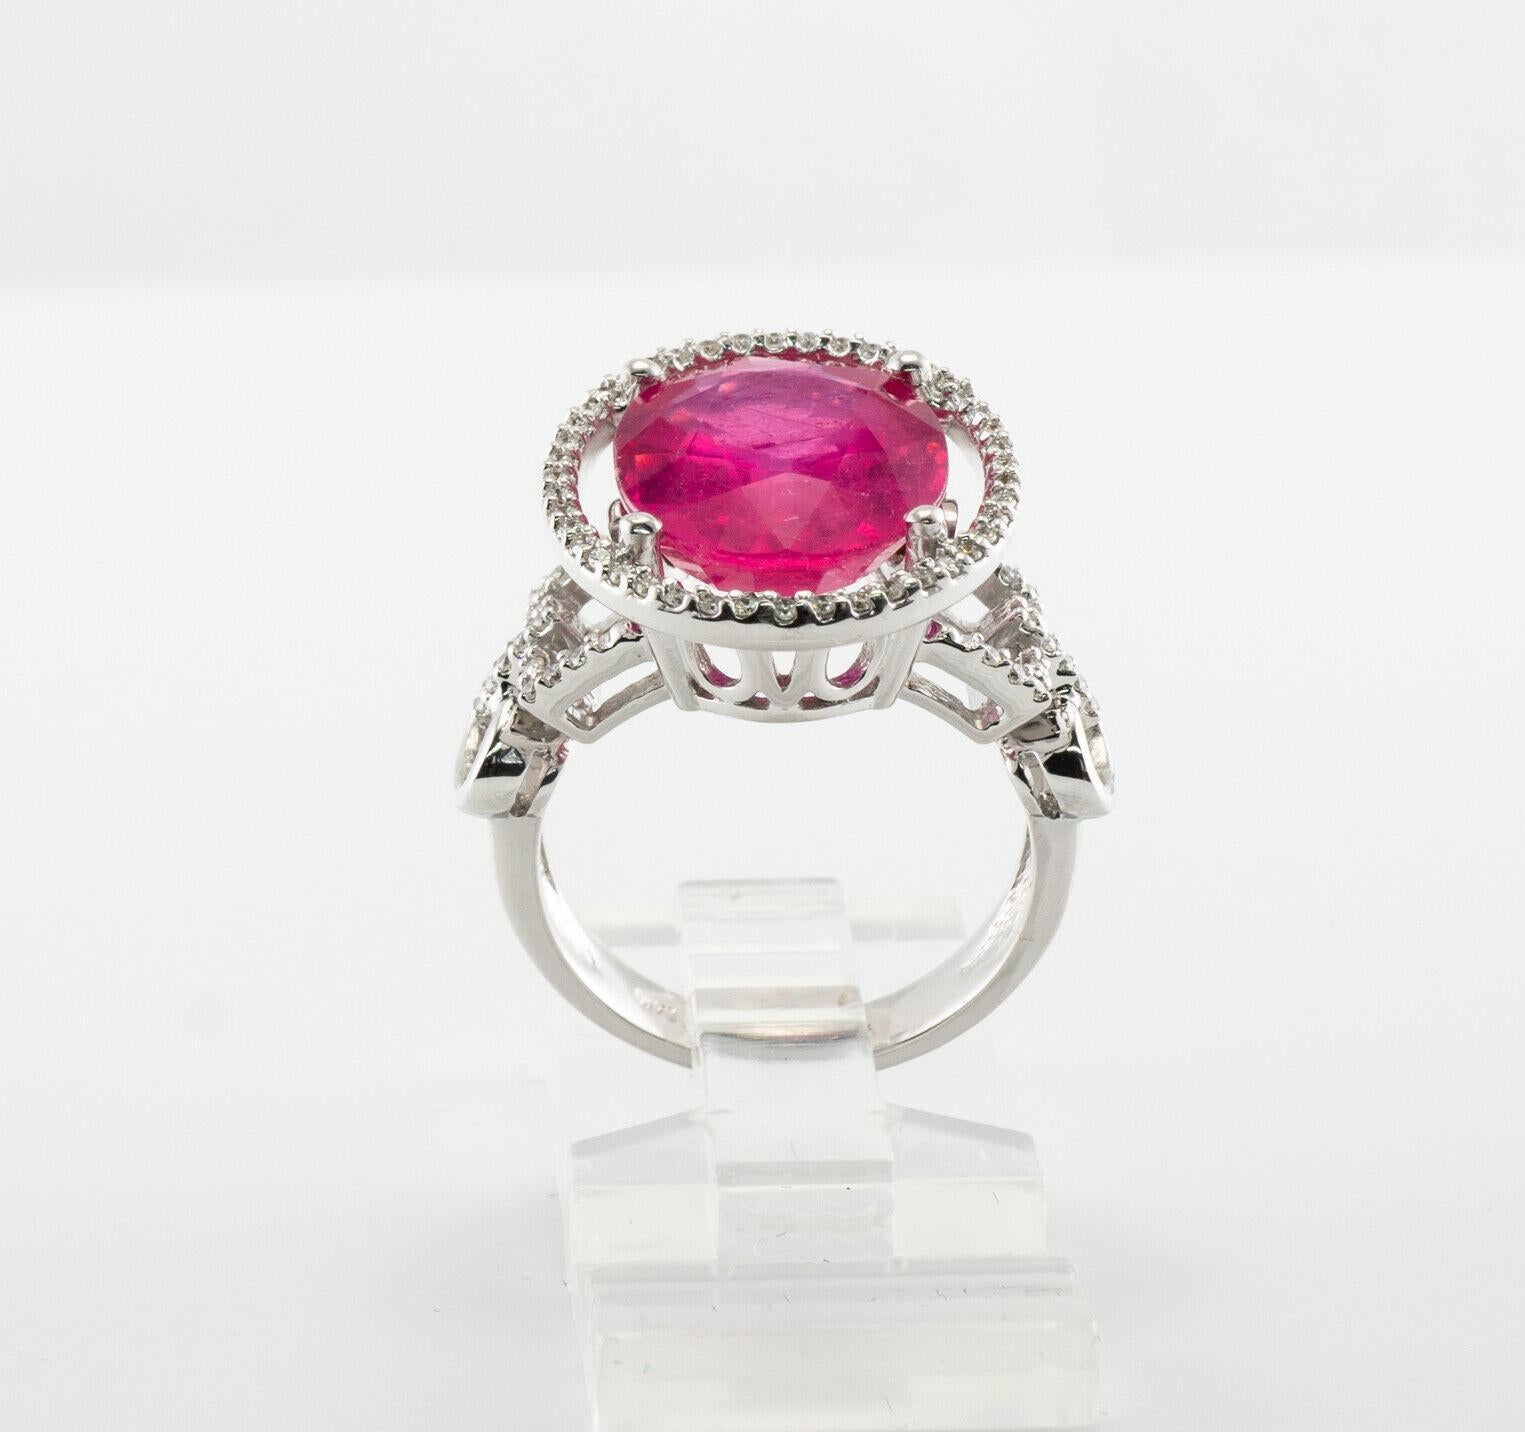 Pink Ruby Diamond Ring 14K White Gold For Sale 4